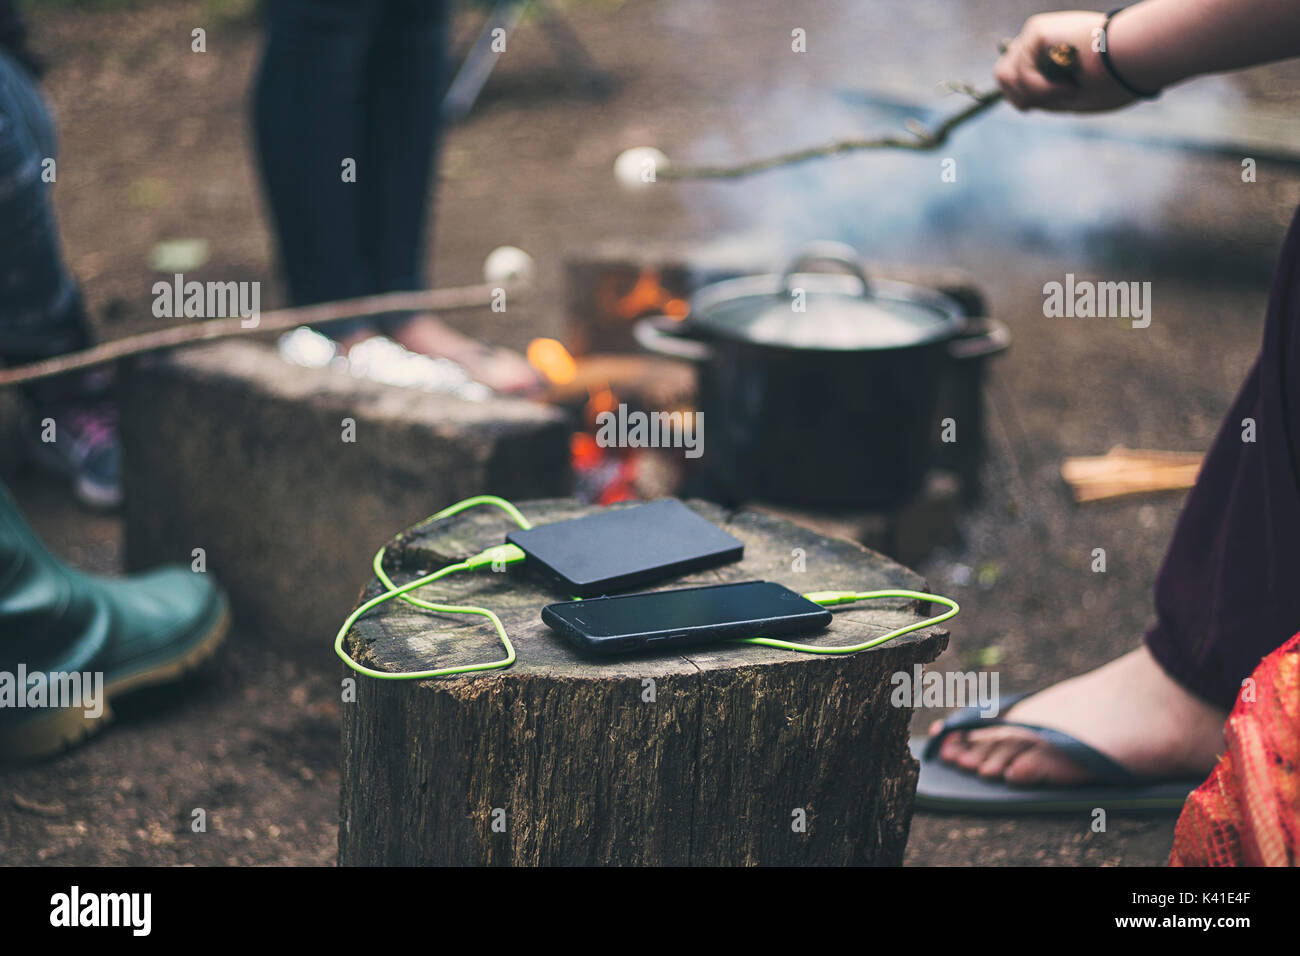 Charging Smartphone by Campfire Stock Photo